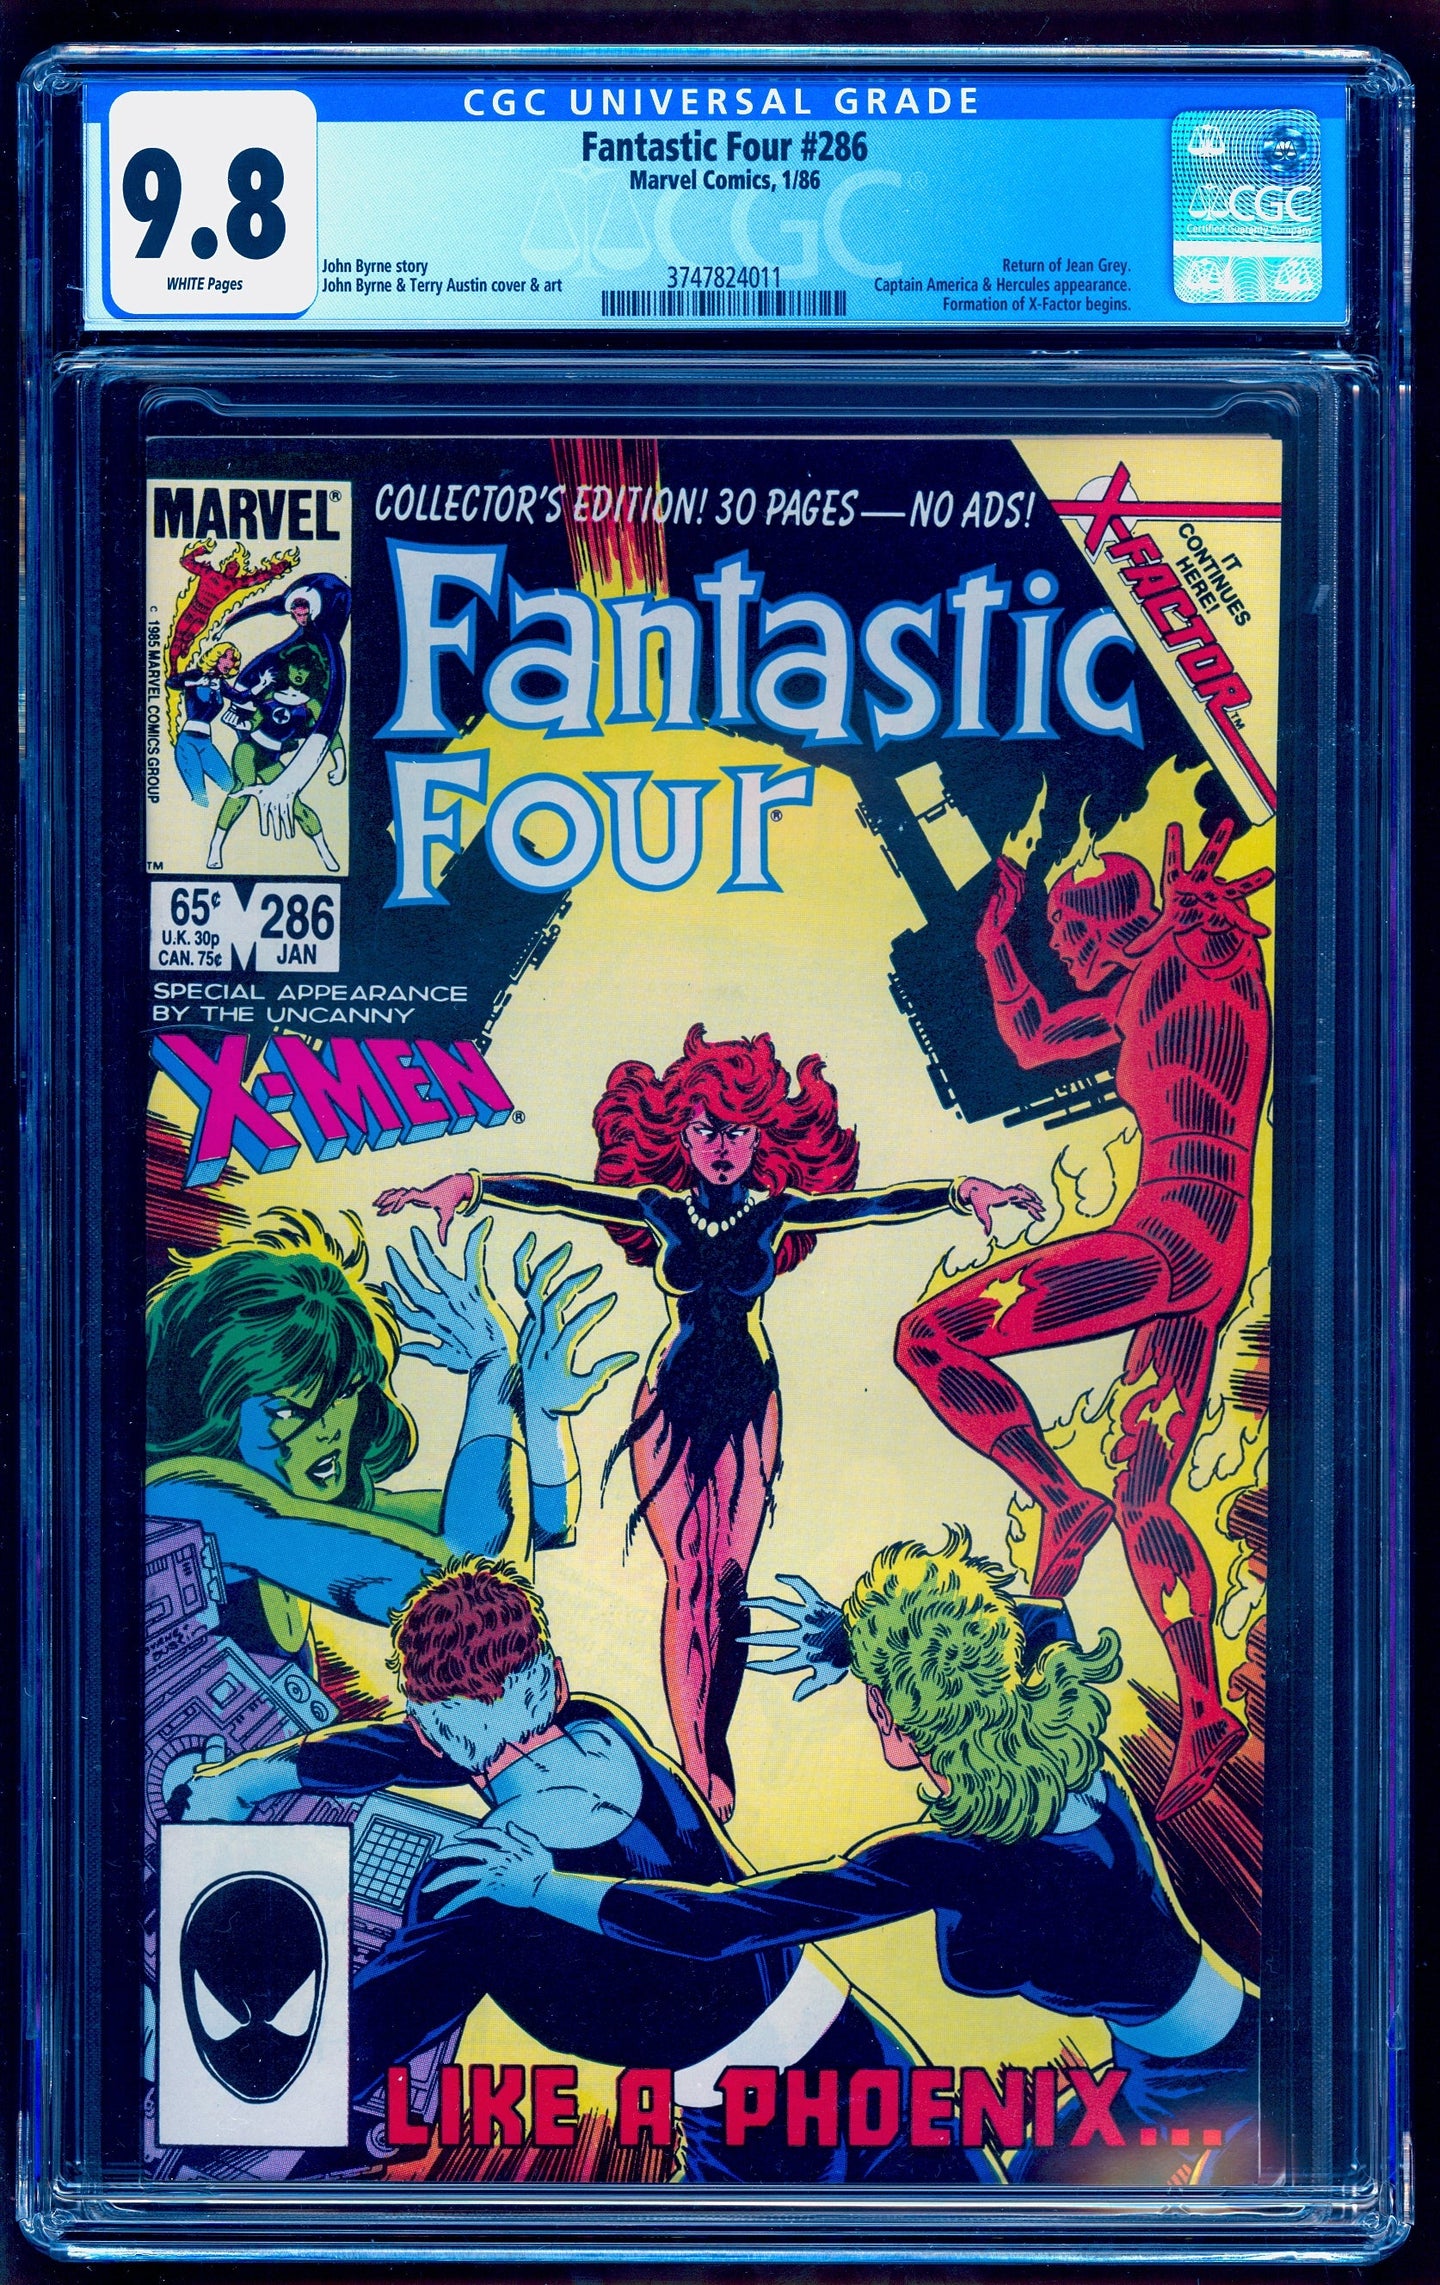 FANTASTIC FOUR #286 CGC 9.8 WHITE PAGES